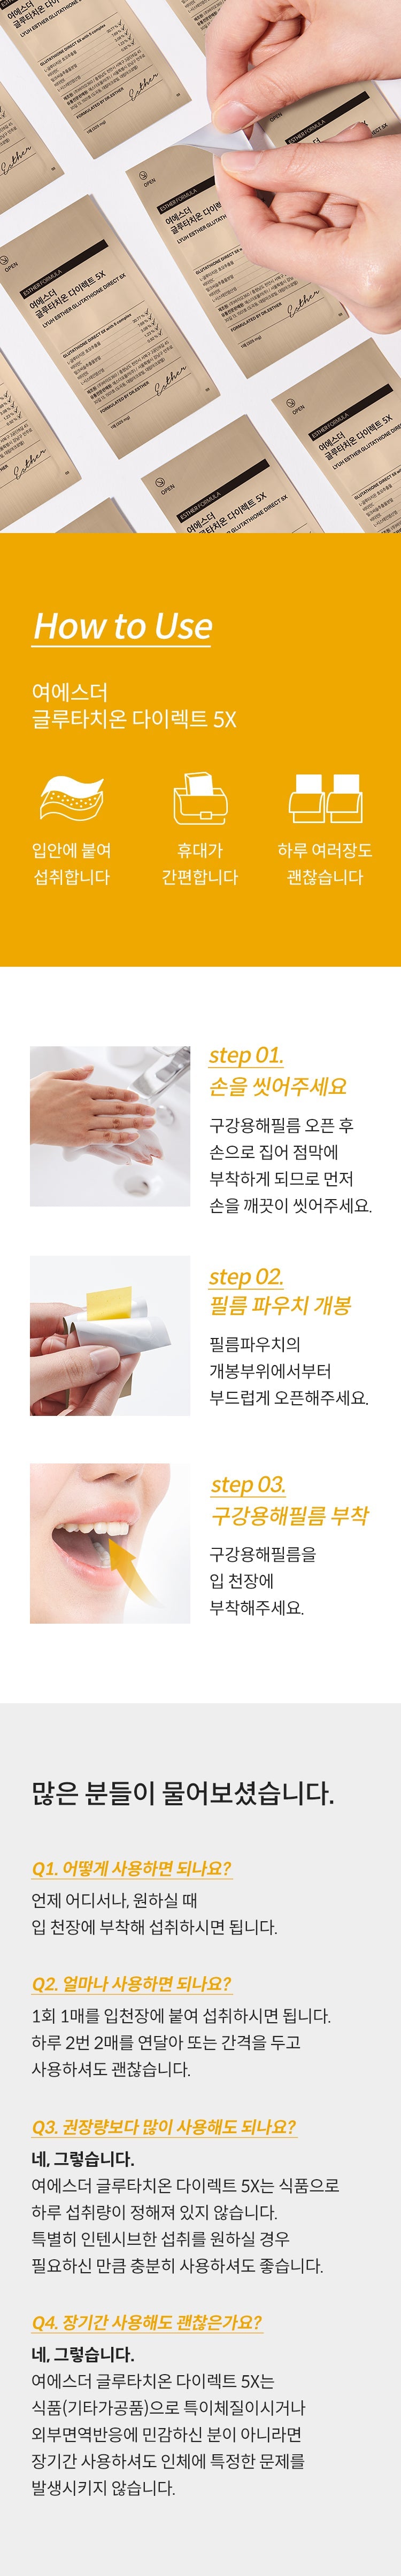 [Dr.ESTHER] New! Glutathione Direct Film 5X  30 Patches